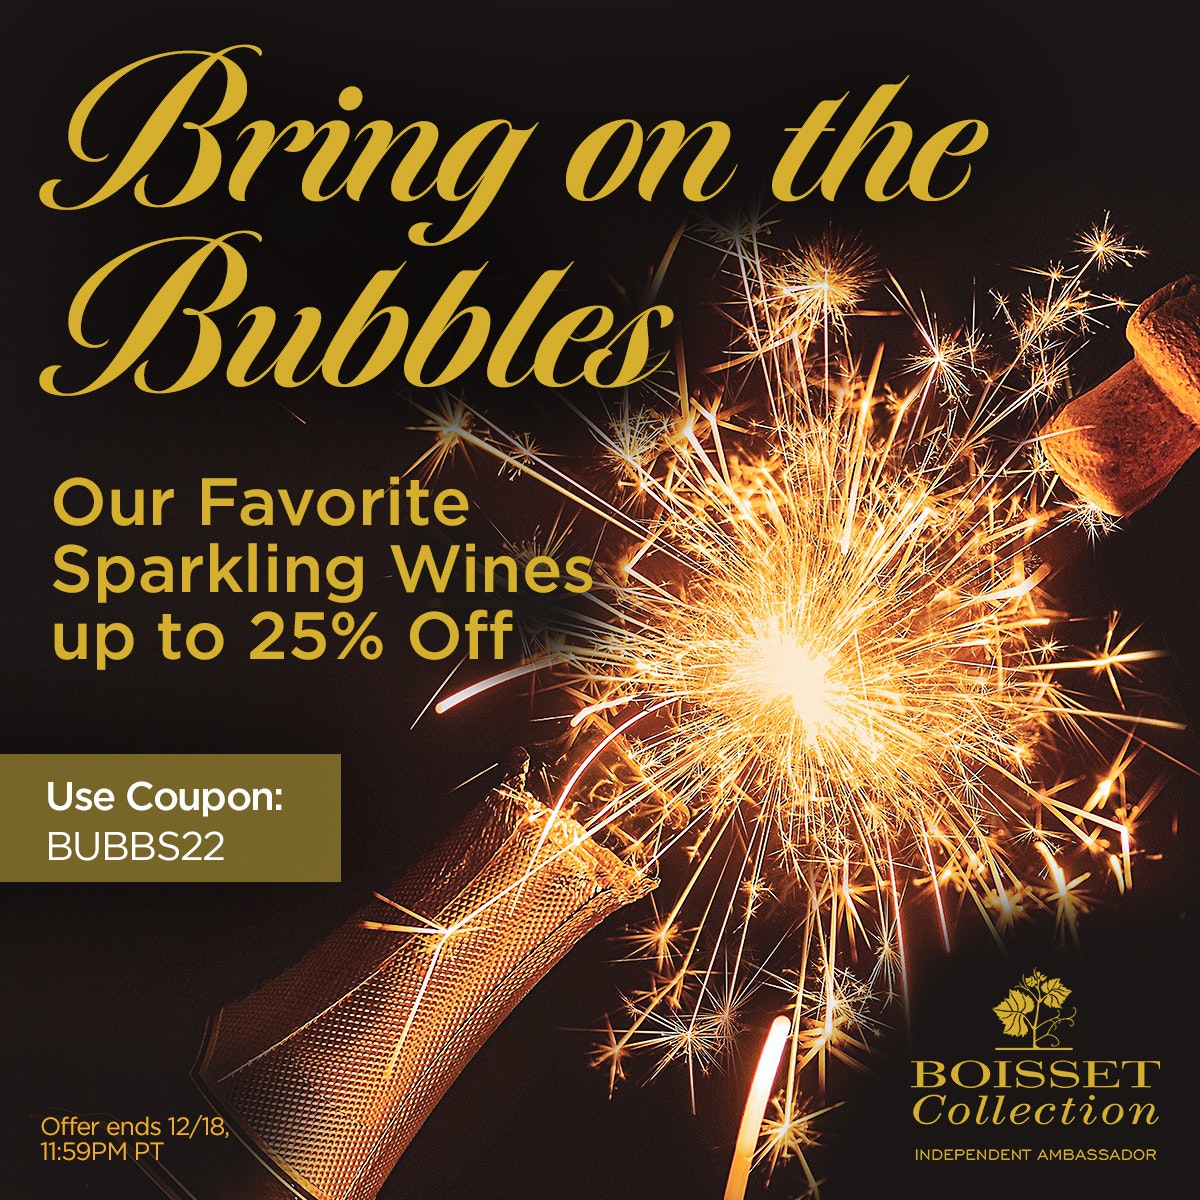 boisset-collection-holiday-bubbles-2022